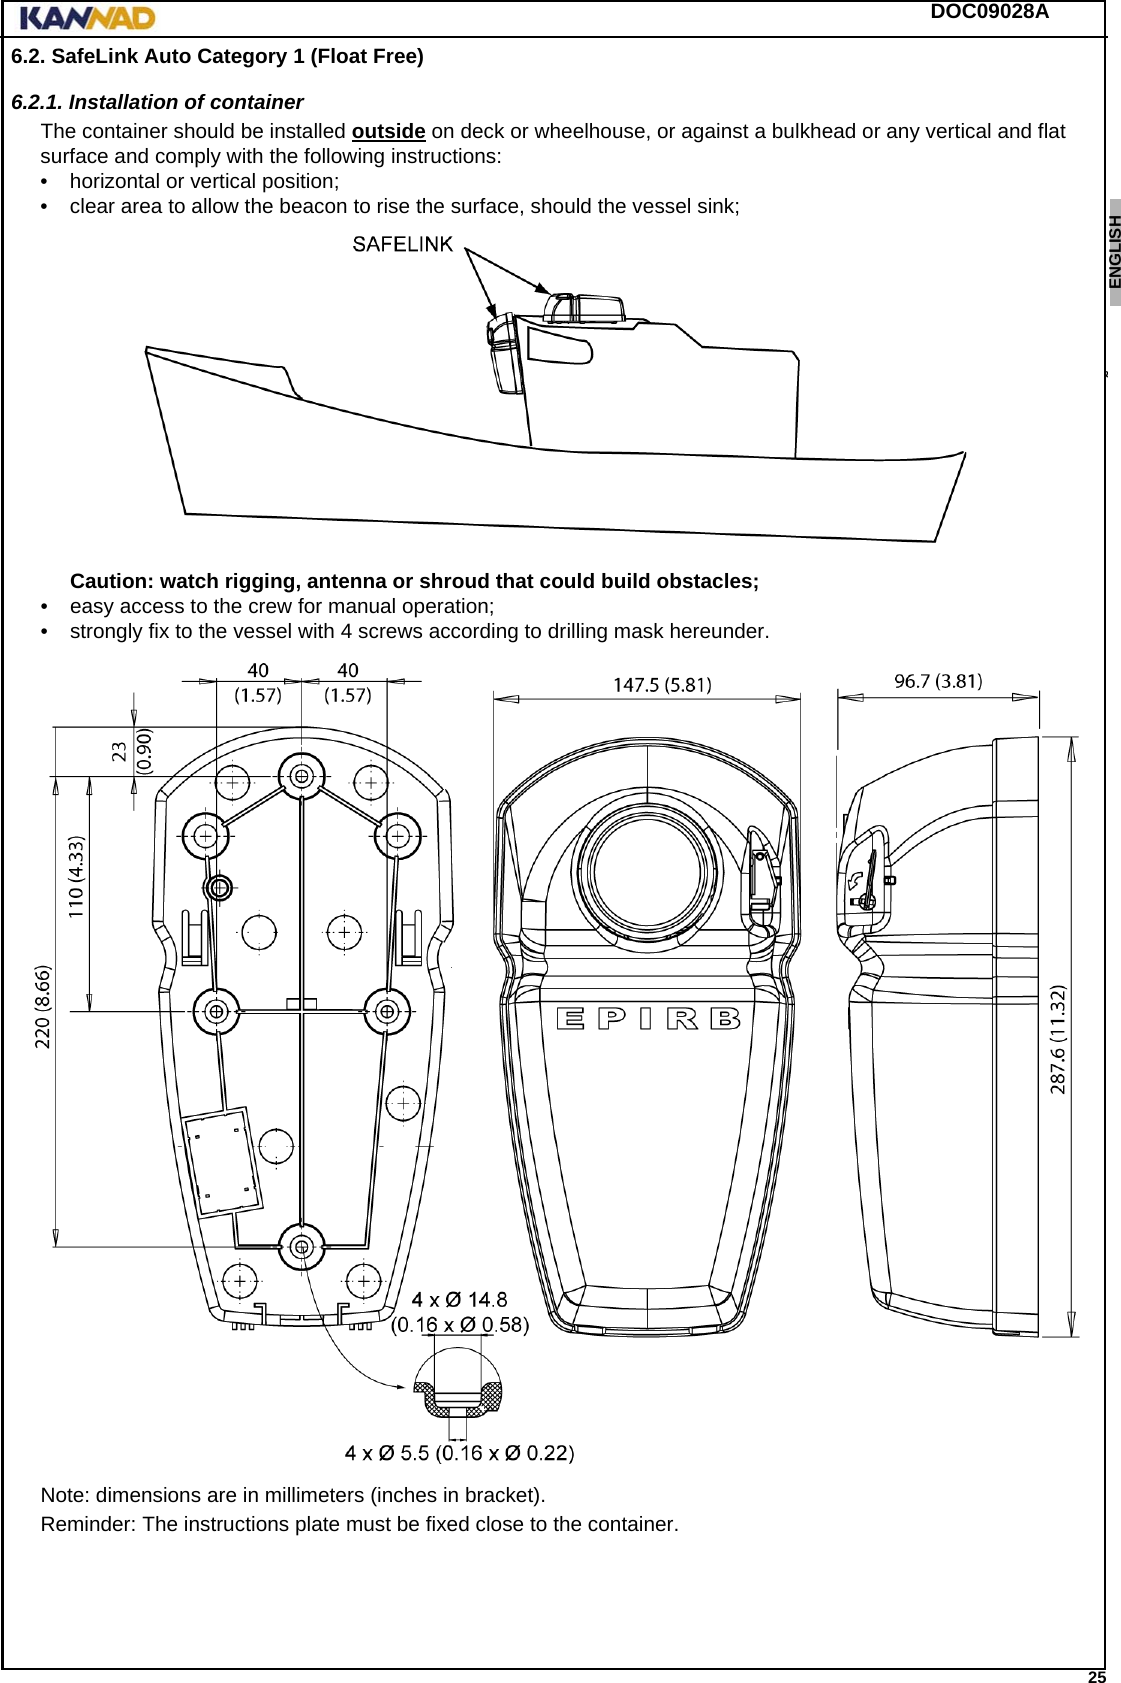 DOC09028A 25ENGLISH ESPAÑOL DEUTSCH  FRANÇAIS ITALIANO NEDERLANDS LANG7 LANG8 LANG9 LANG10 LANG11 LANG12 6.2. SafeLink Auto Category 1 (Float Free)6.2.1. Installation of containerThe container should be installed outside on deck or wheelhouse, or against a bulkhead or any vertical and flat surface and comply with the following instructions: • horizontal or vertical position;• clear area to allow the beacon to rise the surface, should the vessel sink; Caution: watch rigging, antenna or shroud that could build obstacles;• easy access to the crew for manual operation;• strongly fix to the vessel with 4 screws according to drilling mask hereunder.Note: dimensions are in millimeters (inches in bracket).Reminder: The instructions plate must be fixed close to the container.